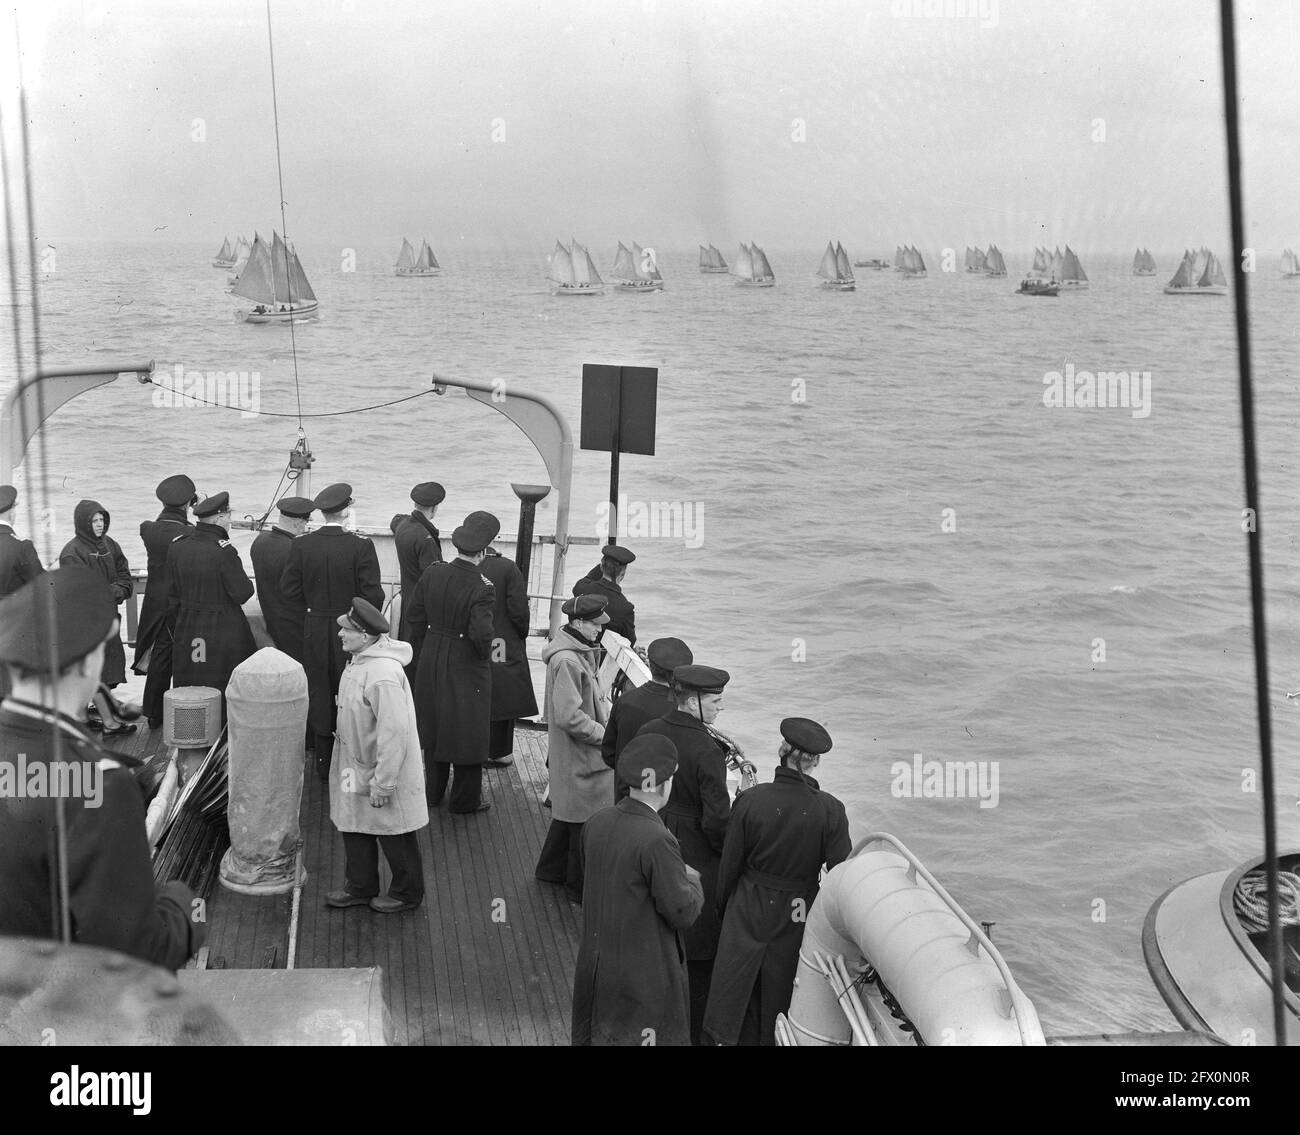 Sailing regatta of the Royal Navy Colonel Bax, 24 October 1952, MARINE, sailing regattas, The Netherlands, 20th century press agency photo, news to remember, documentary, historic photography 1945-1990, visual stories, human history of the Twentieth Century, capturing moments in time Stock Photo